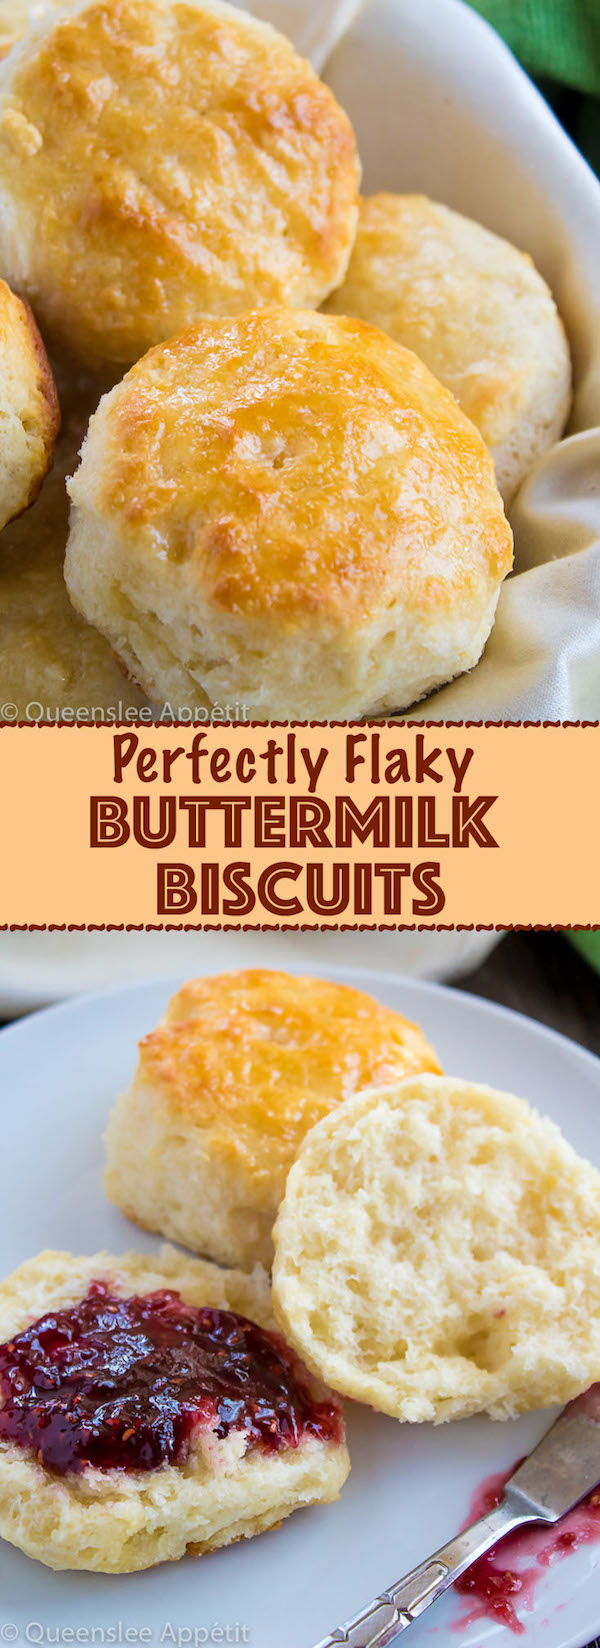 Perfectly Flaky Buttermilk Biscuits ~ Recipe | Queenslee Appétit